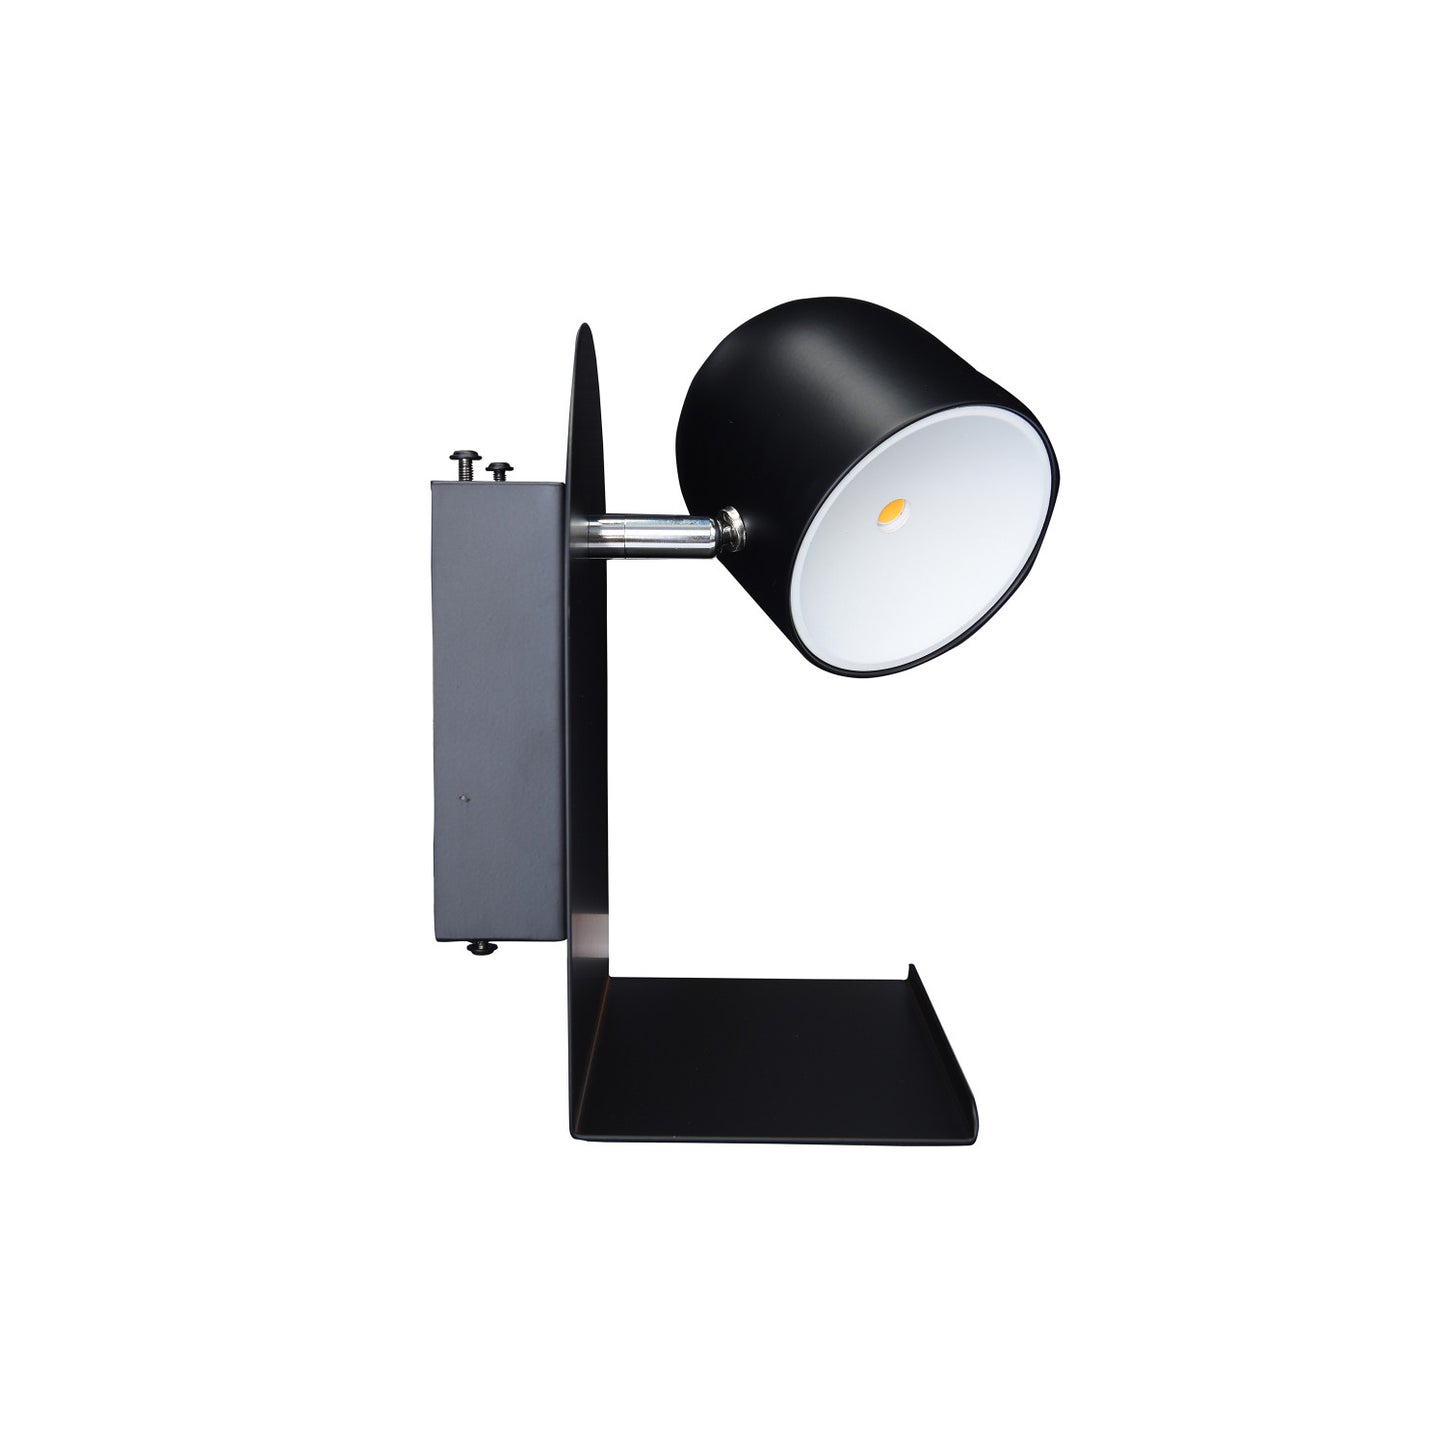 Lamp Wall Sconce With Shelf and USB Port Black Metal